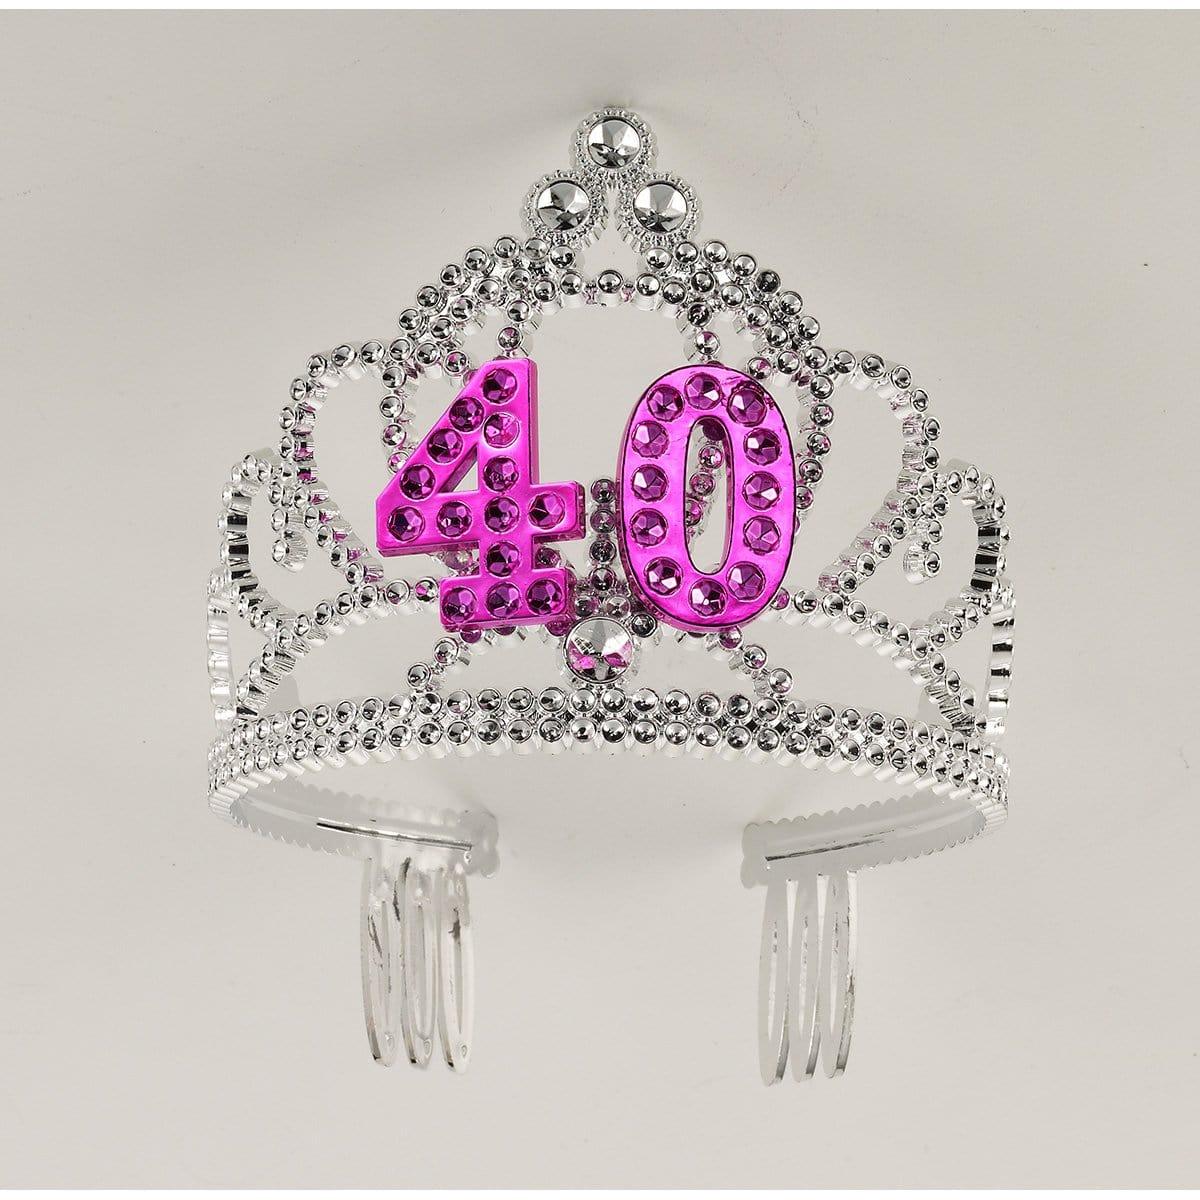 Buy Age Specific Birthday Plastic Tiara - 40th Birthday sold at Party Expert